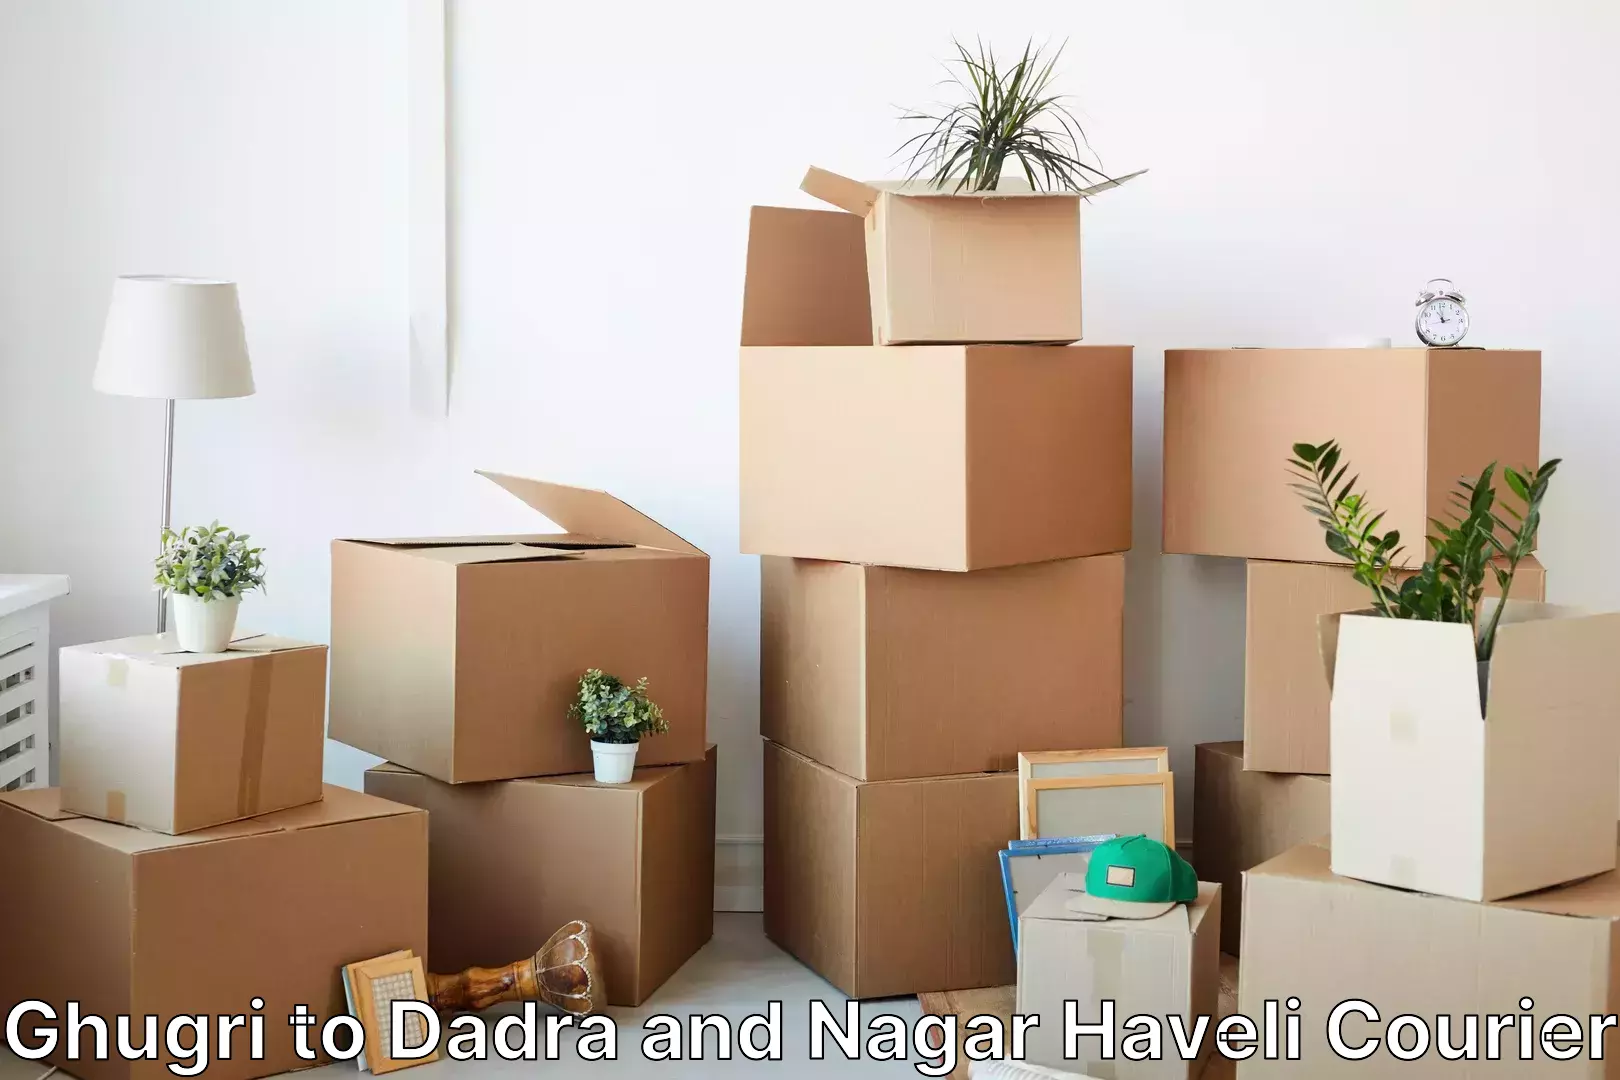 Personalized courier experiences Ghugri to Dadra and Nagar Haveli